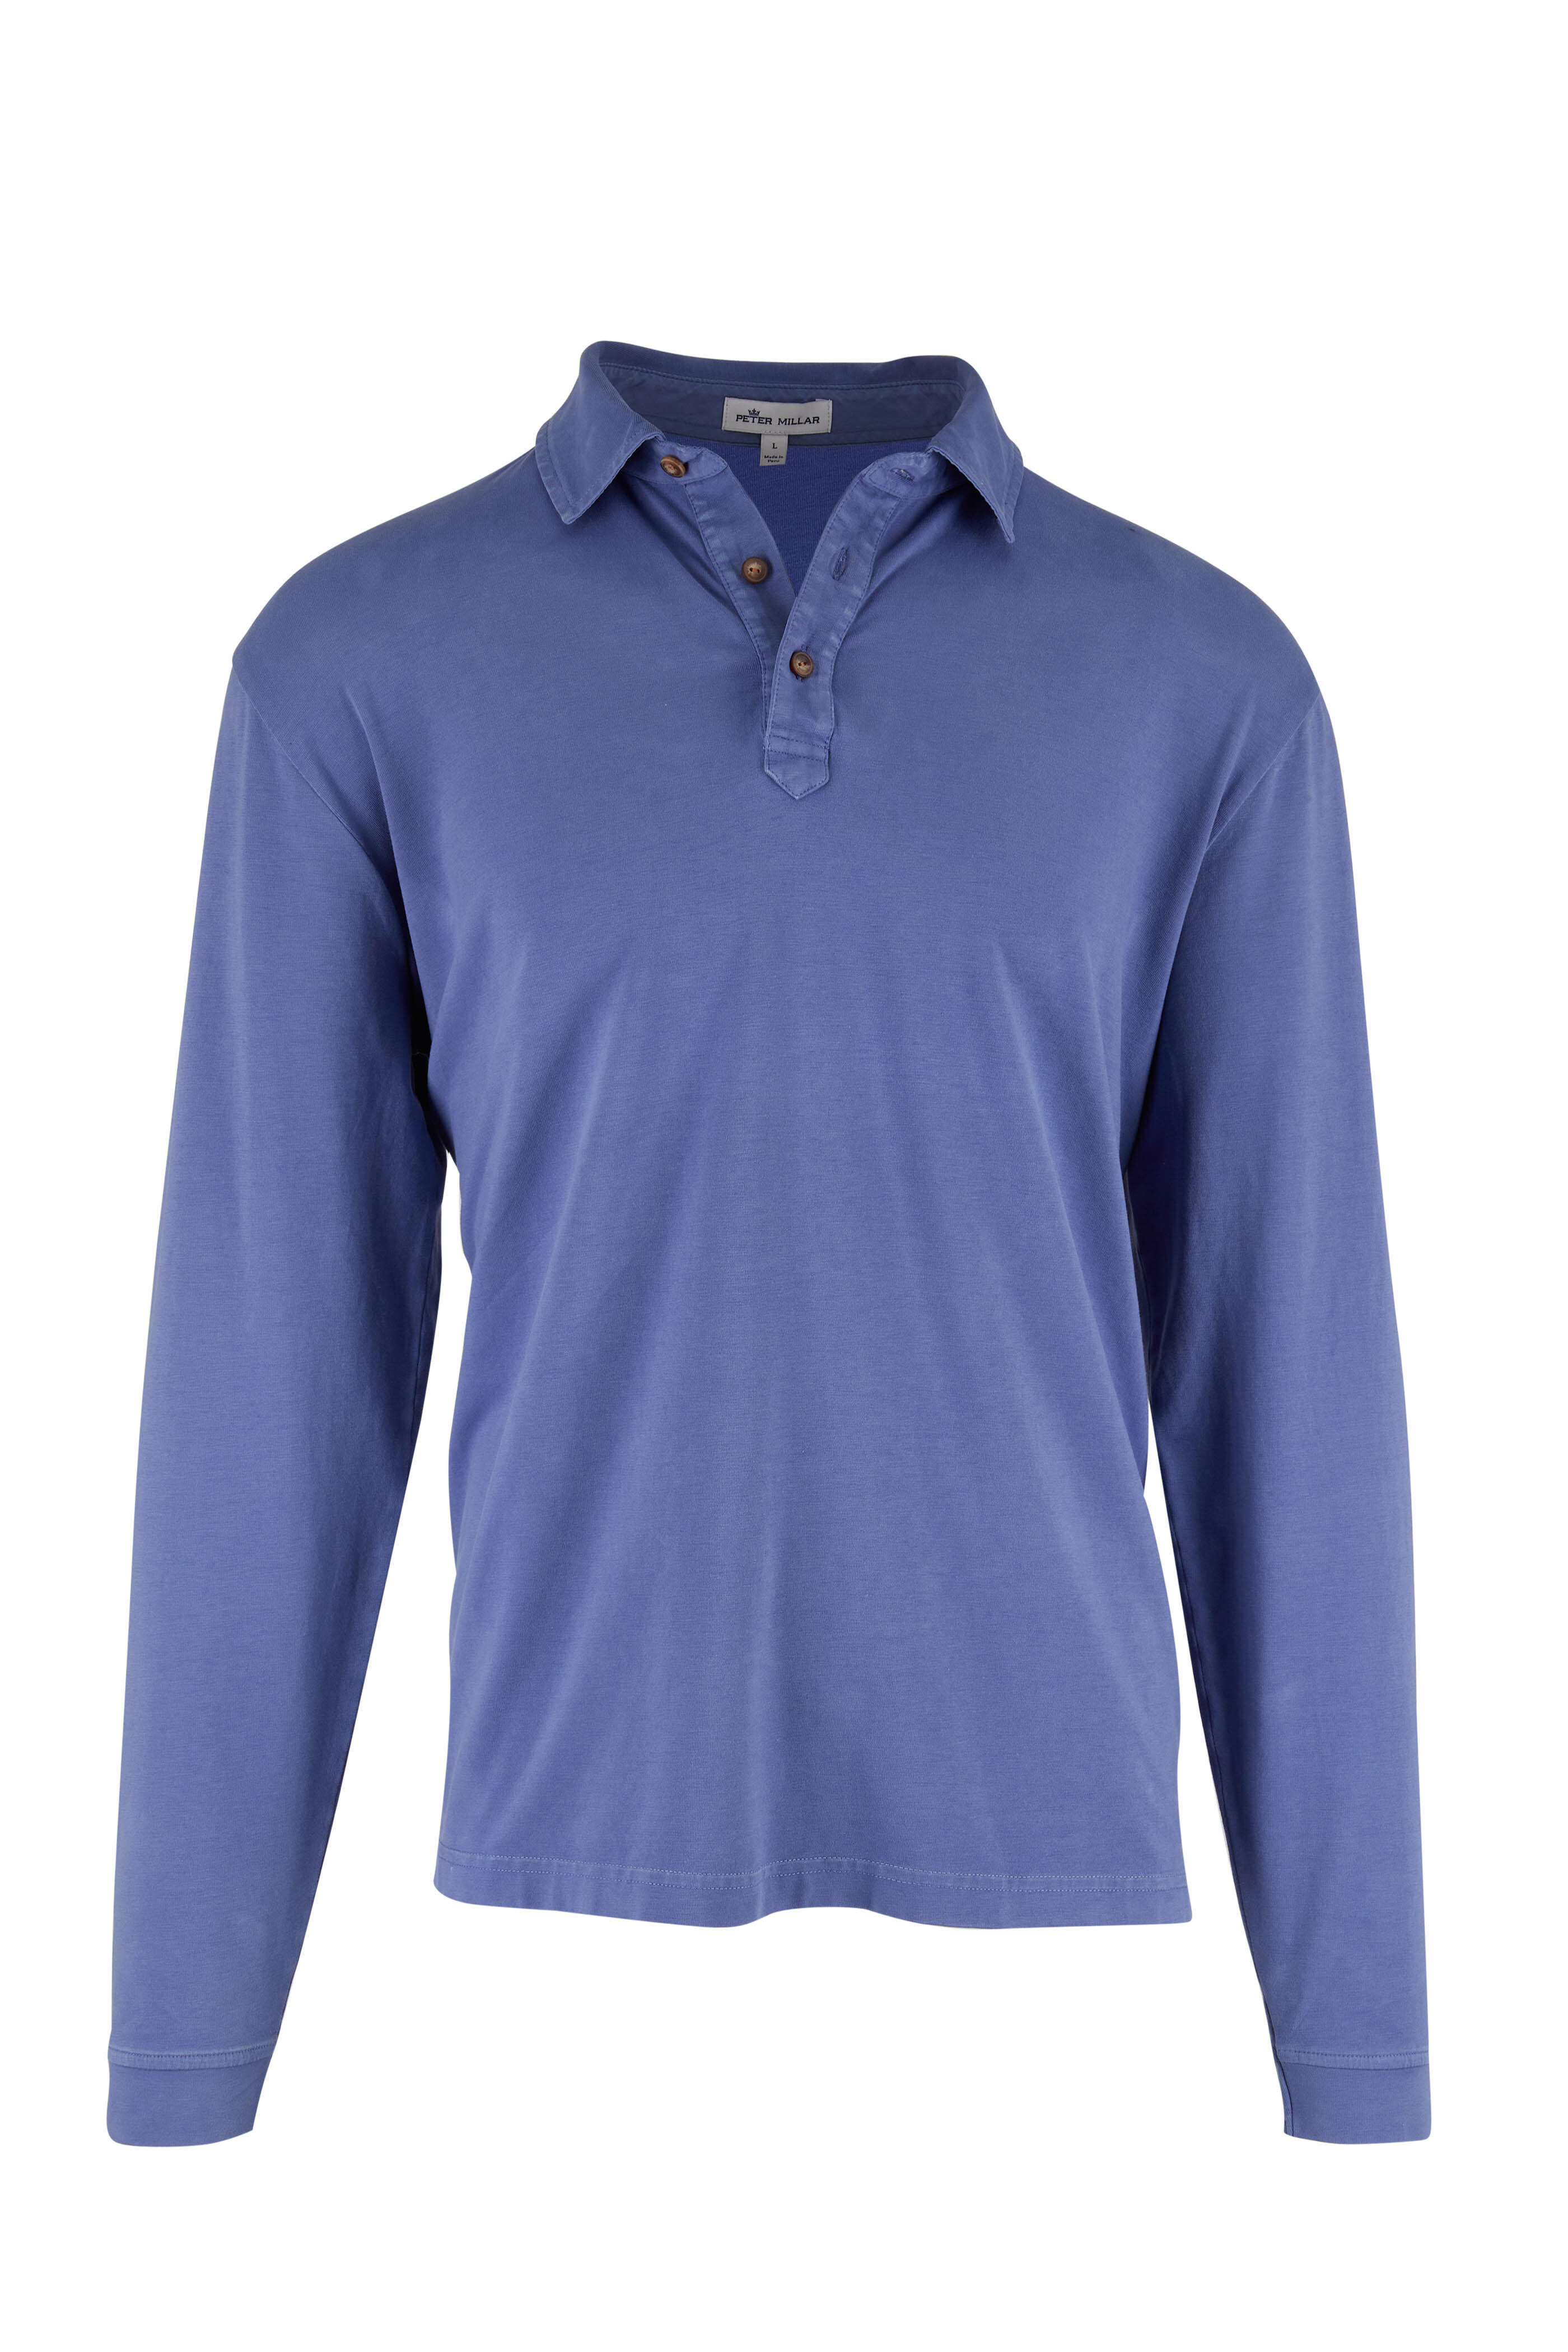 Peter Millar - Lava Wash Blue Long Sleeve Polo | Mitchell Stores